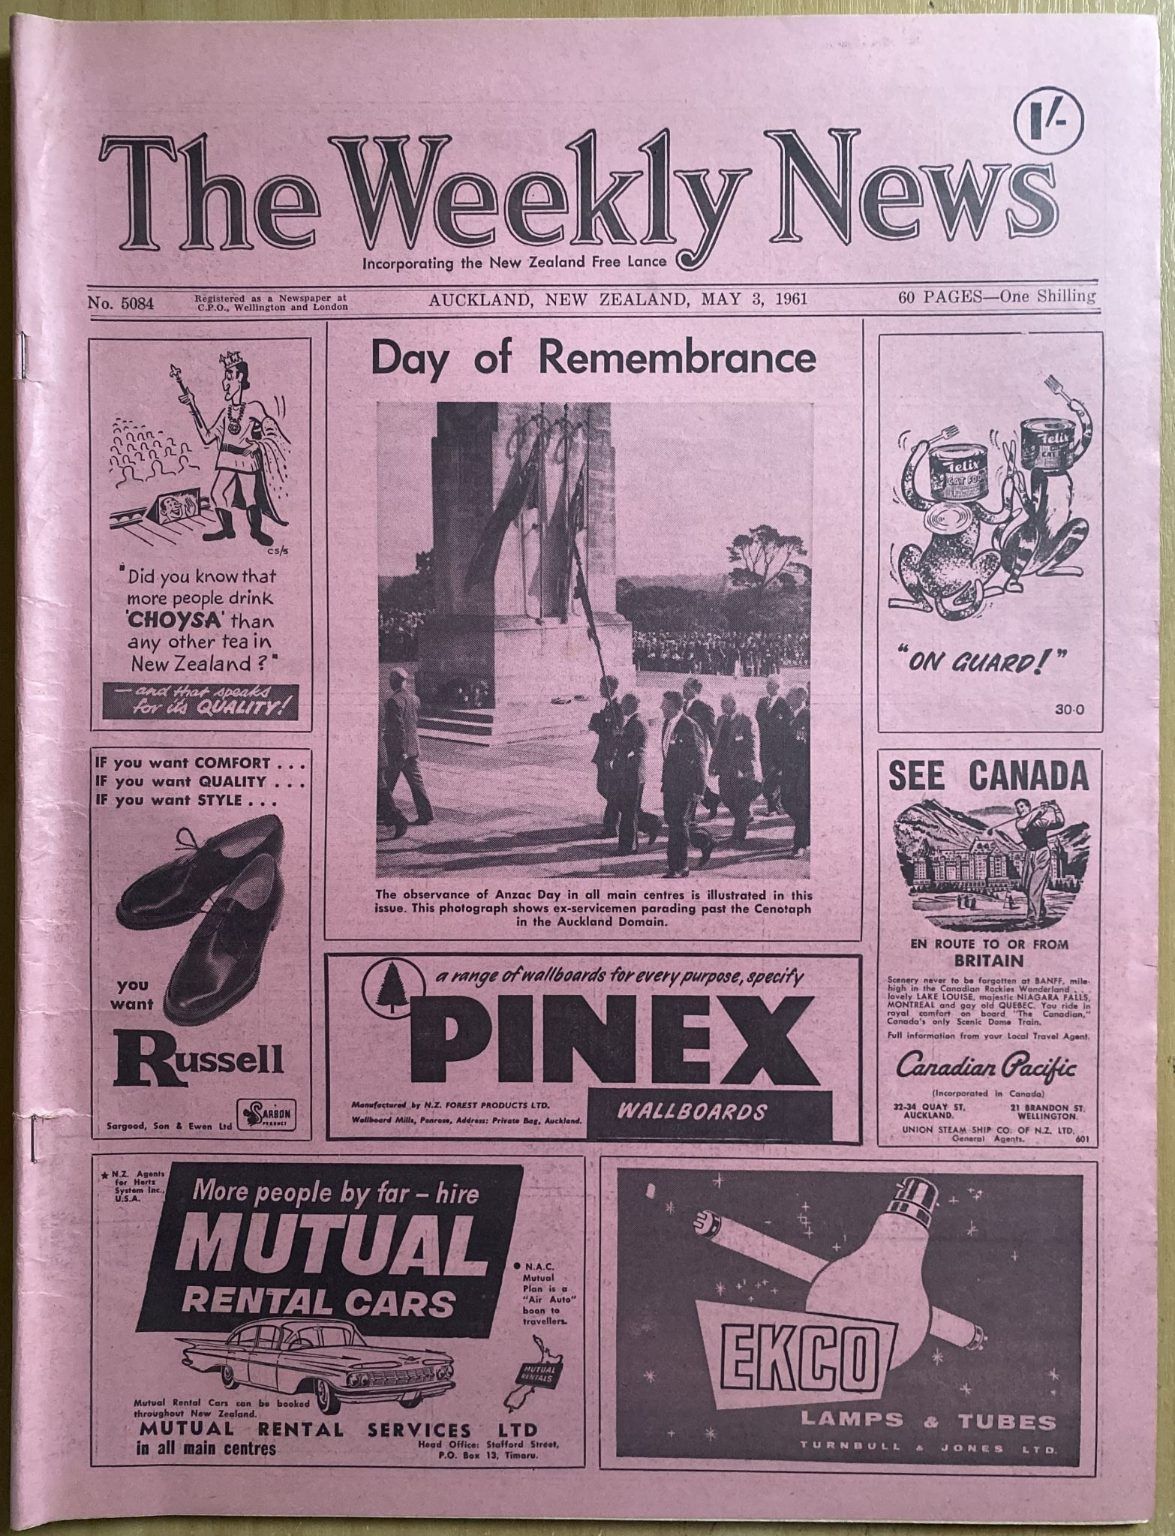 OLD NEWSPAPER: The Weekly News, No. 5084, 3 May 1961